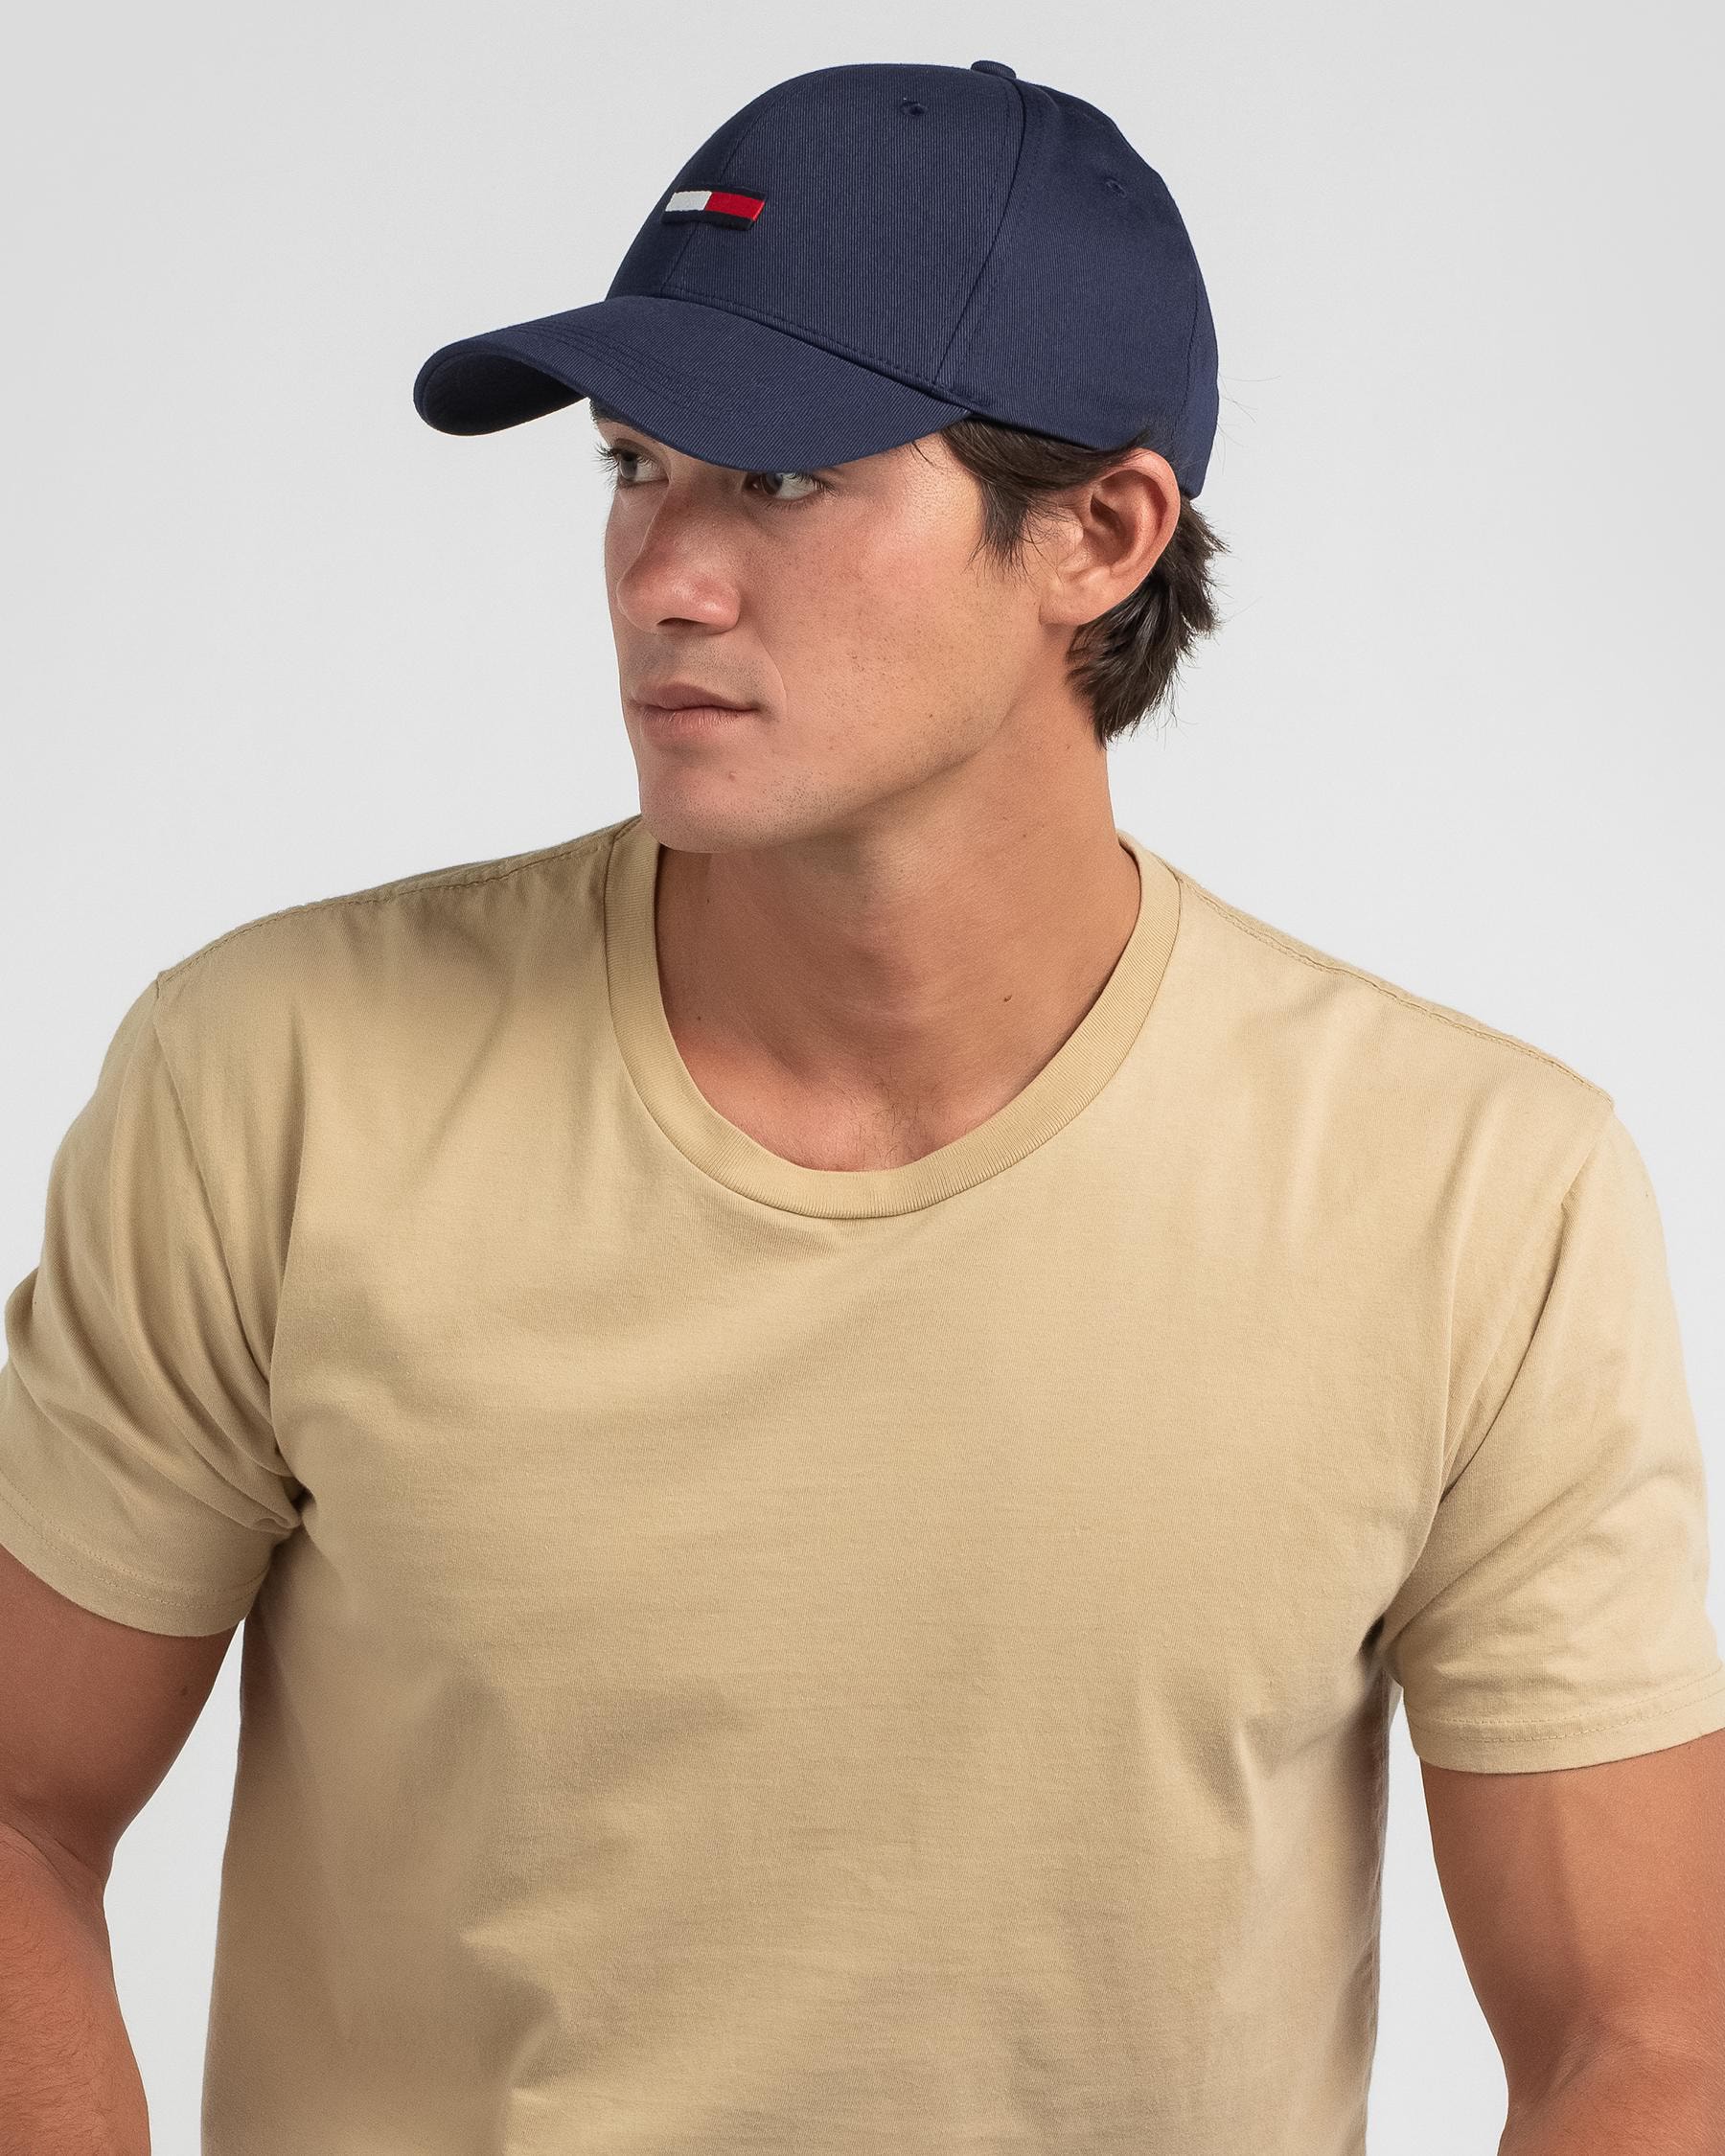 Tommy Hilfiger In Twilight Returns Easy Beach & Cap Navy United States - - Shipping FREE* TJM City Flag